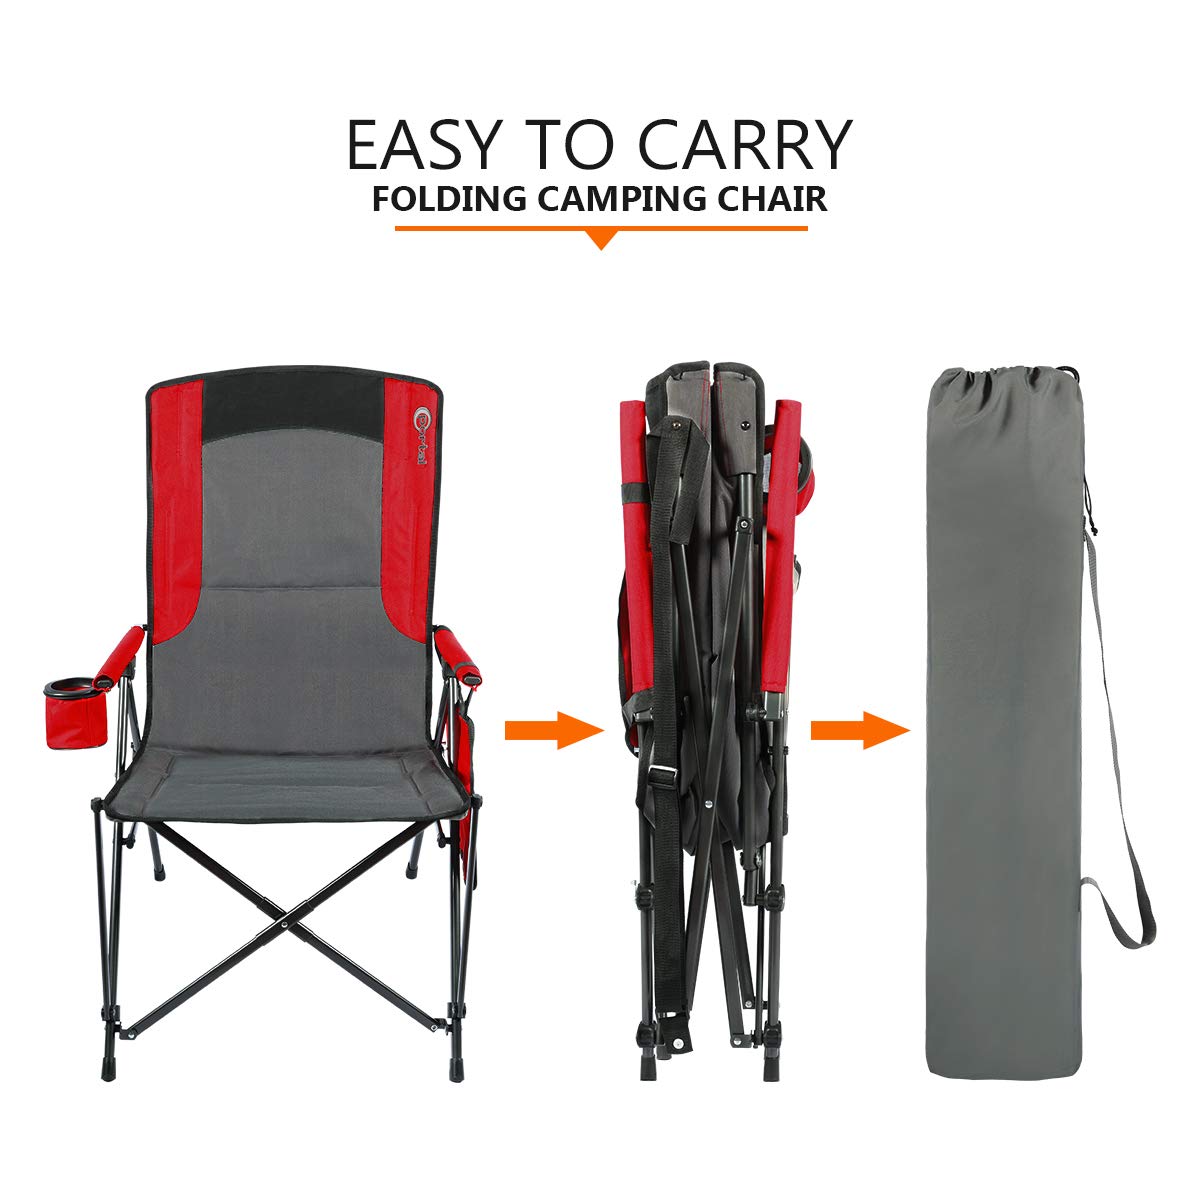 PORTAL Oversized Double Folding Camping Chair High Back Cup Holder Hard Armrest Storage Pockets Carry Bag Included, Support 300 lbs, Red